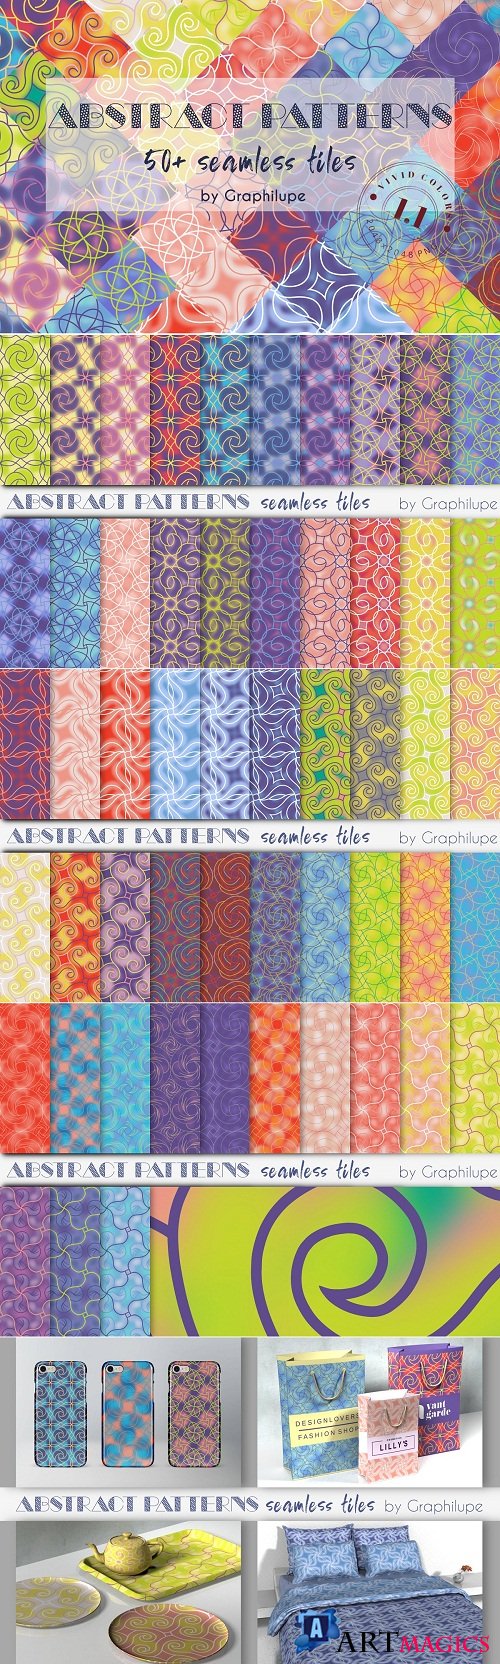 Abstract Patterns Vol. 1.1 - 2878439